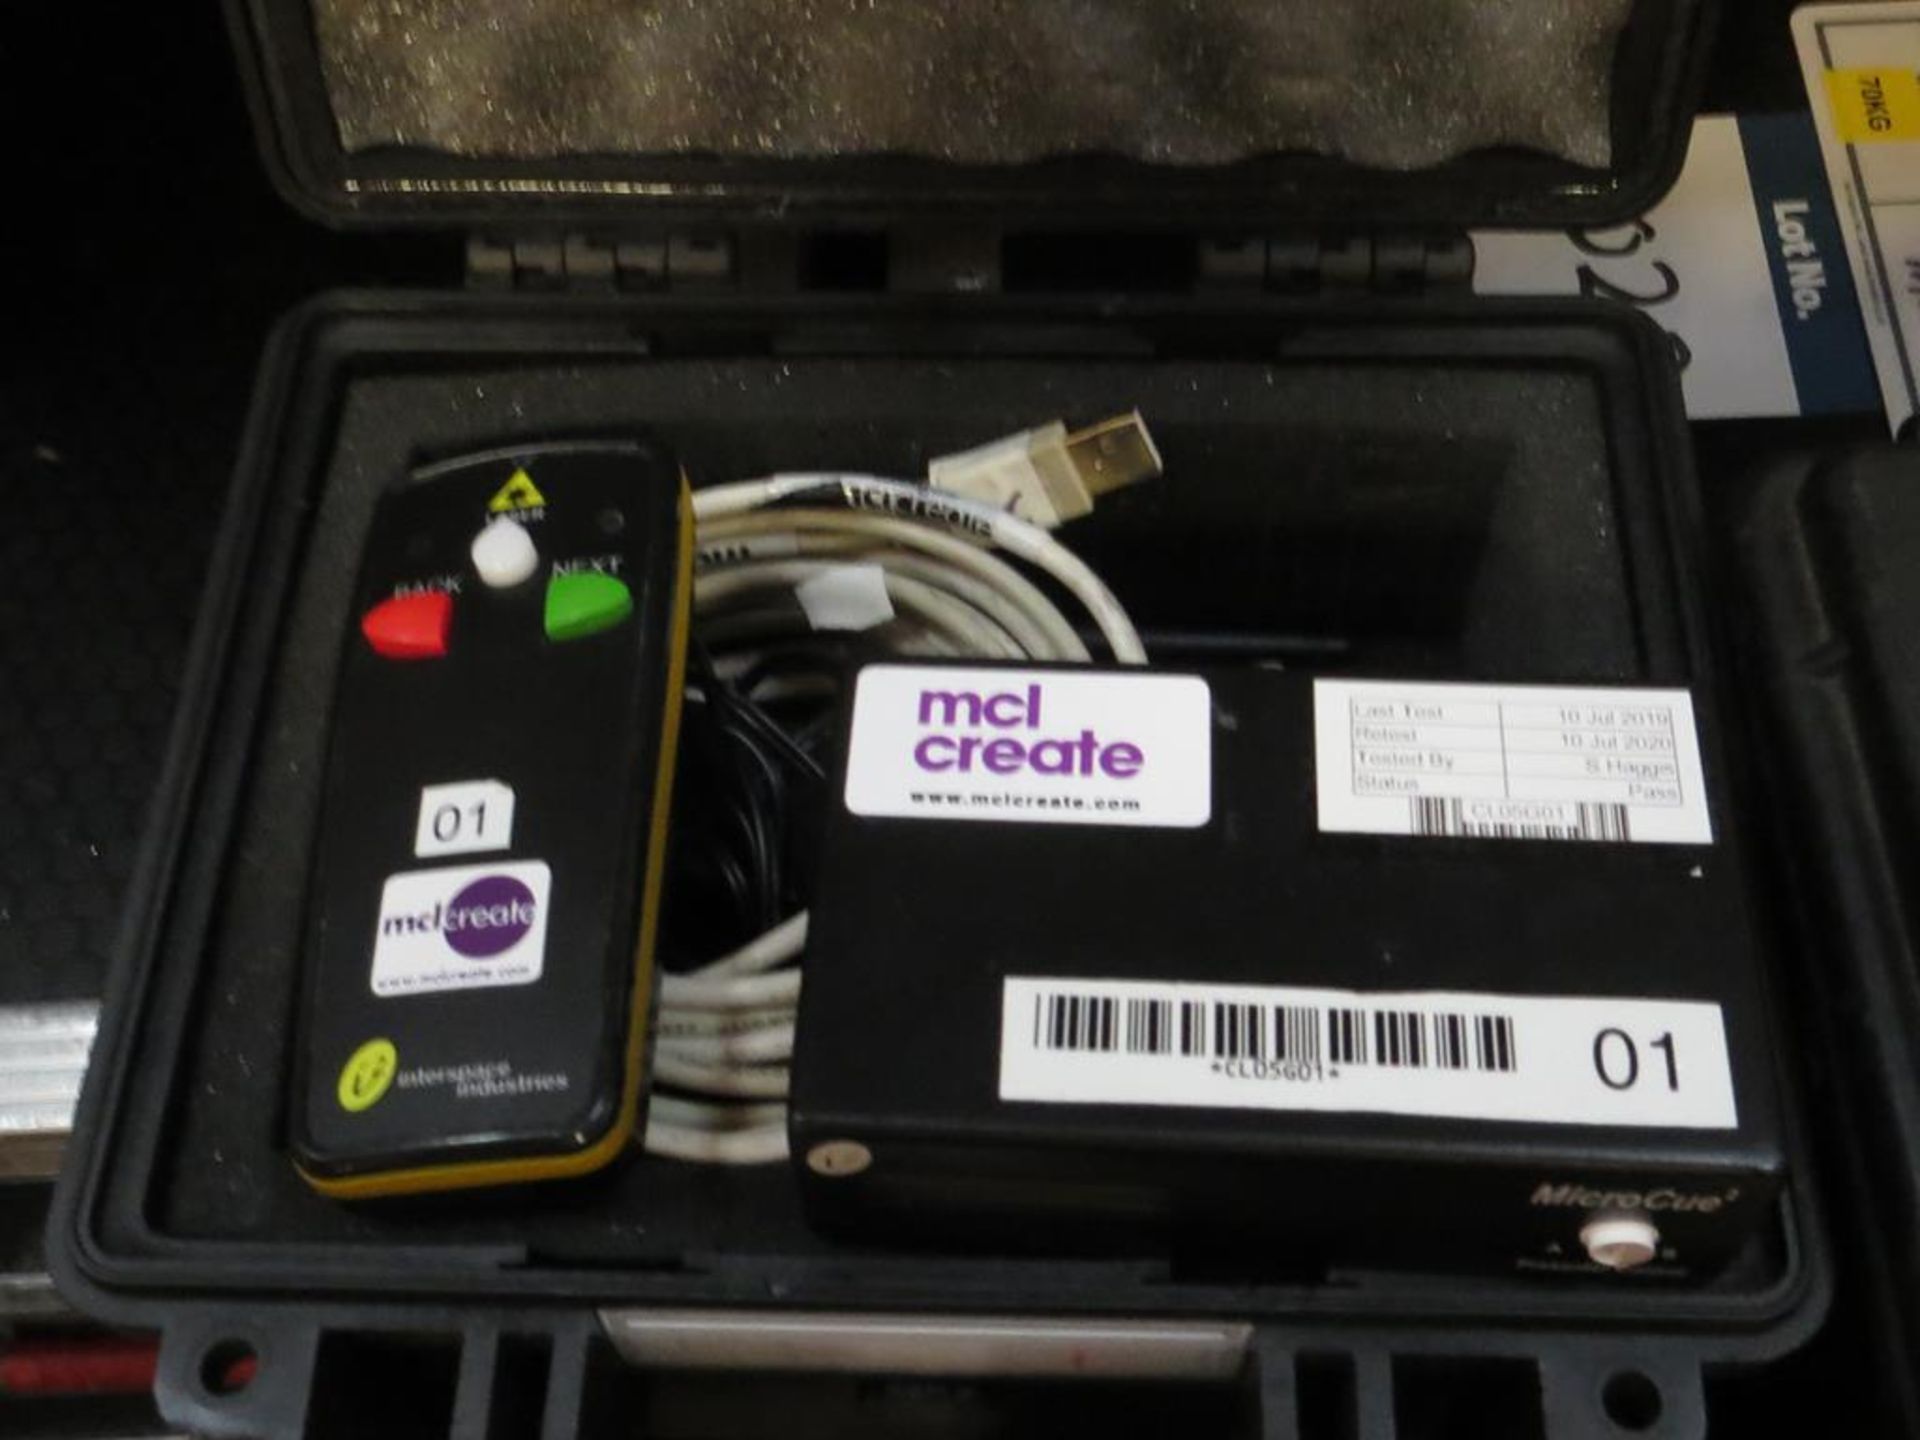 Interspace Industries, Micro Cue 2 queuing system, Serial No. 2064130048 in transit case: Unit C - Image 2 of 3